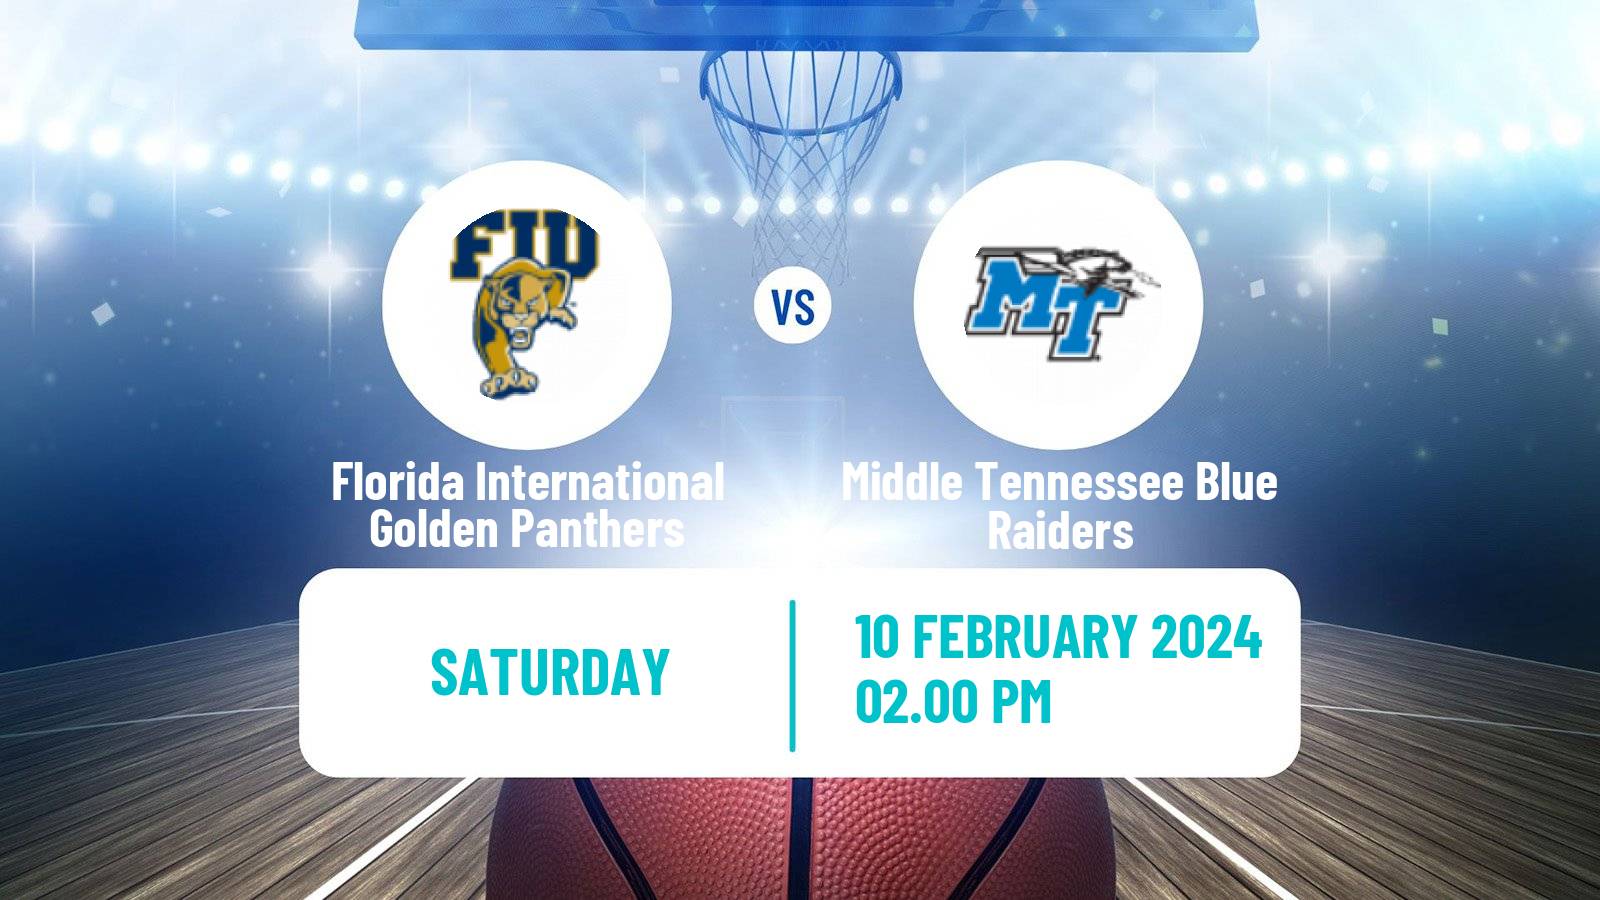 Basketball NCAA College Basketball Florida International Golden Panthers - Middle Tennessee Blue Raiders